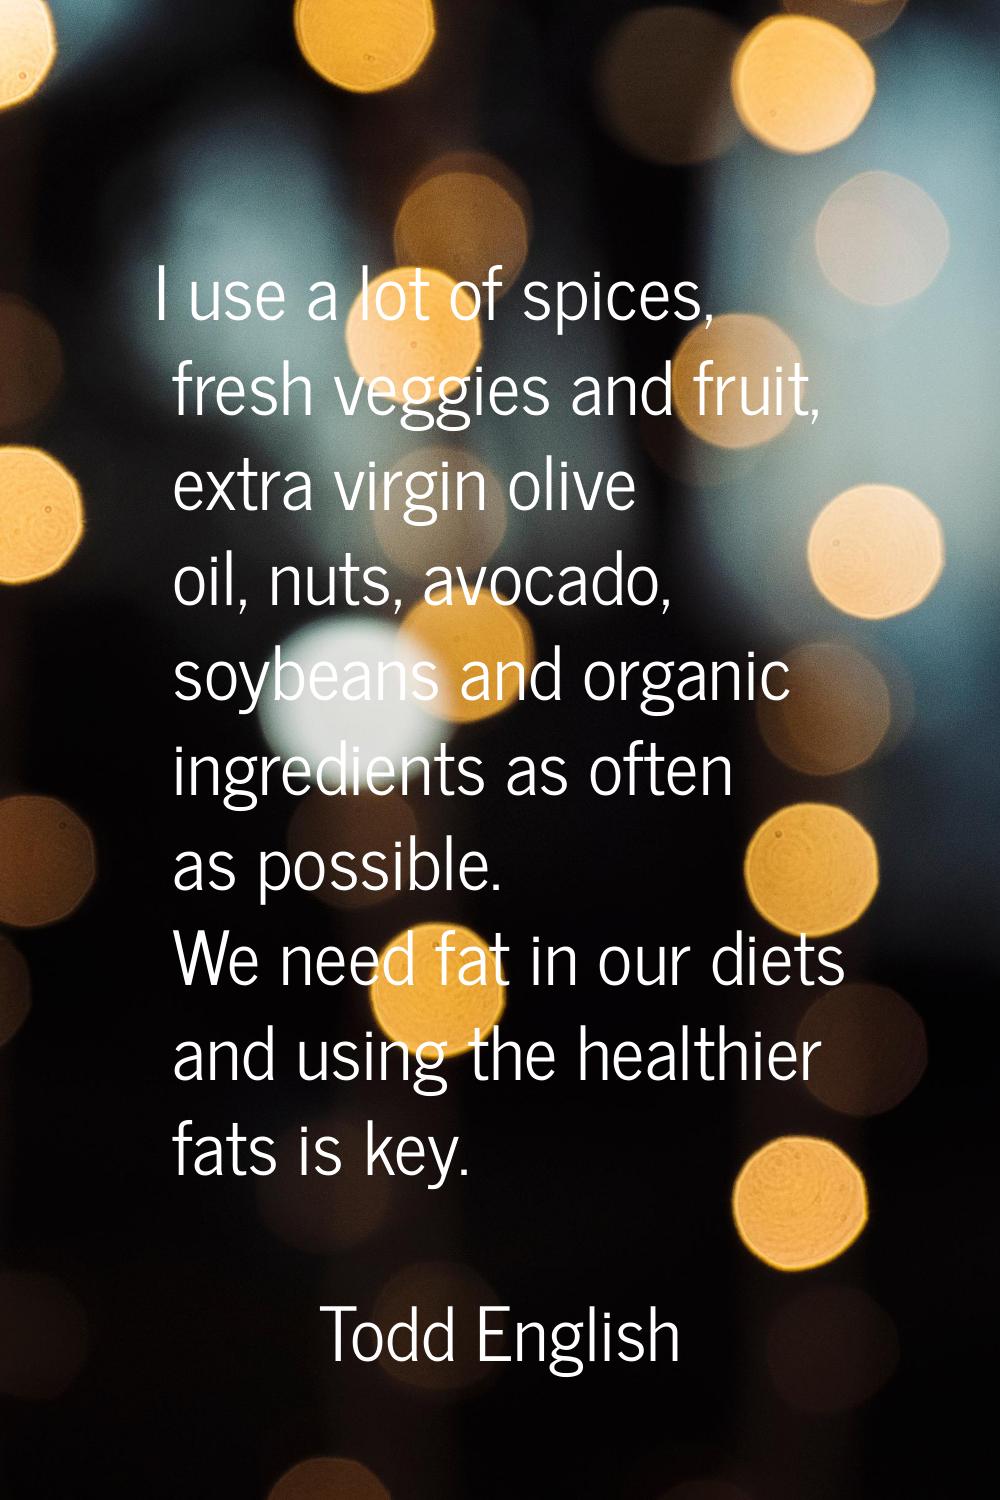 I use a lot of spices, fresh veggies and fruit, extra virgin olive oil, nuts, avocado, soybeans and